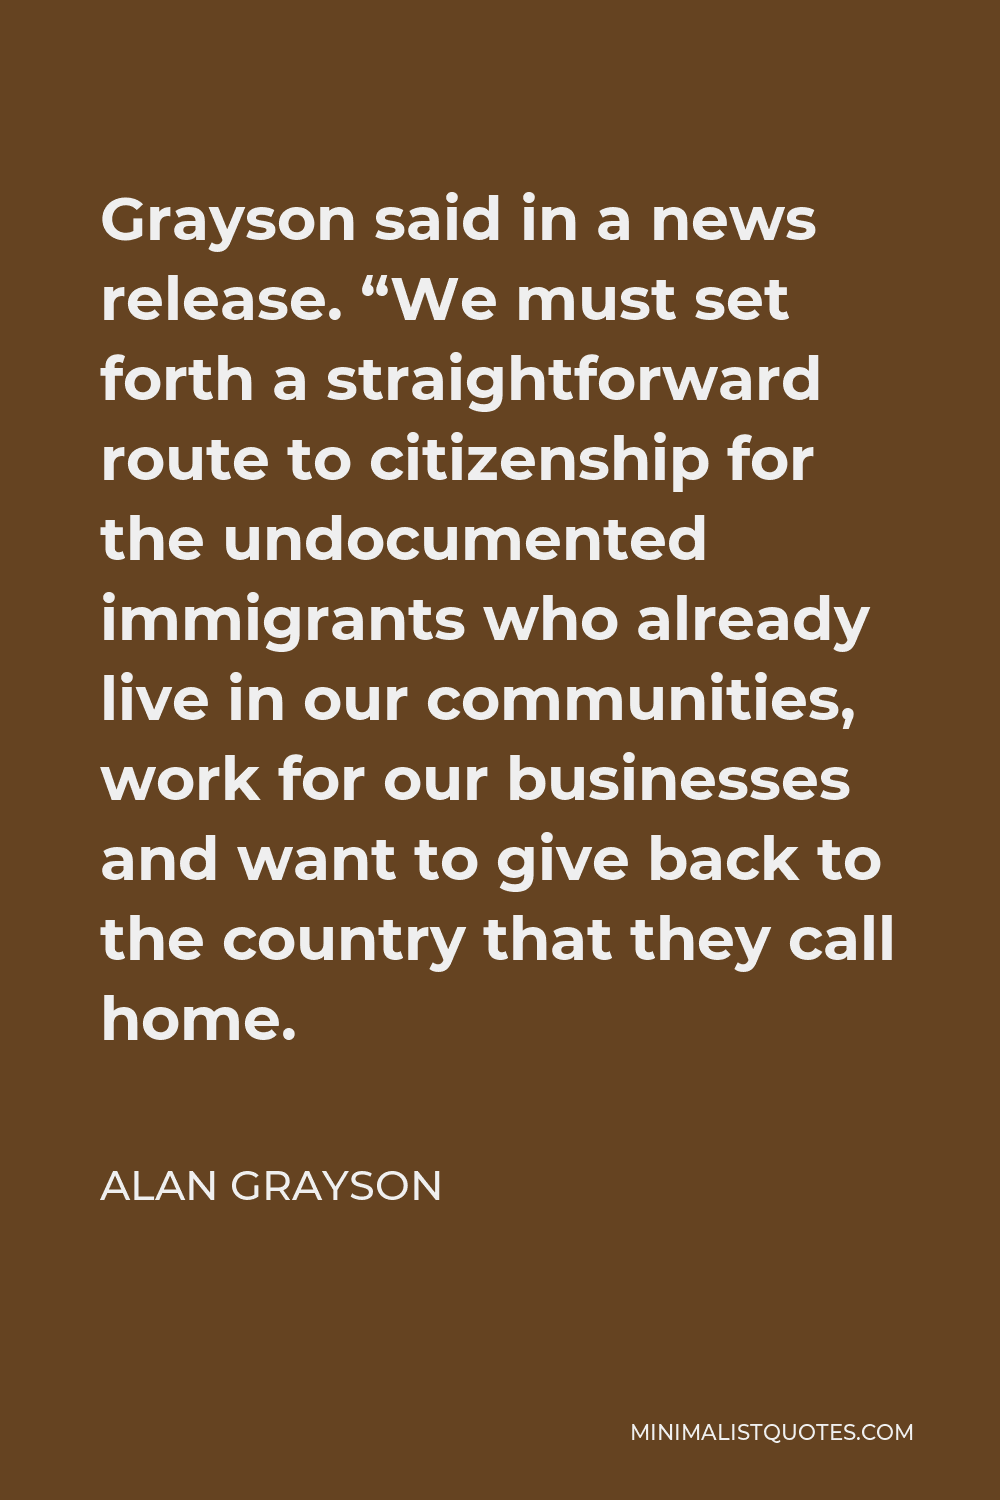 Alan Grayson Quote - Grayson said in a news release. “We must set forth a straightforward route to citizenship for the undocumented immigrants who already live in our communities, work for our businesses and want to give back to the country that they call home.